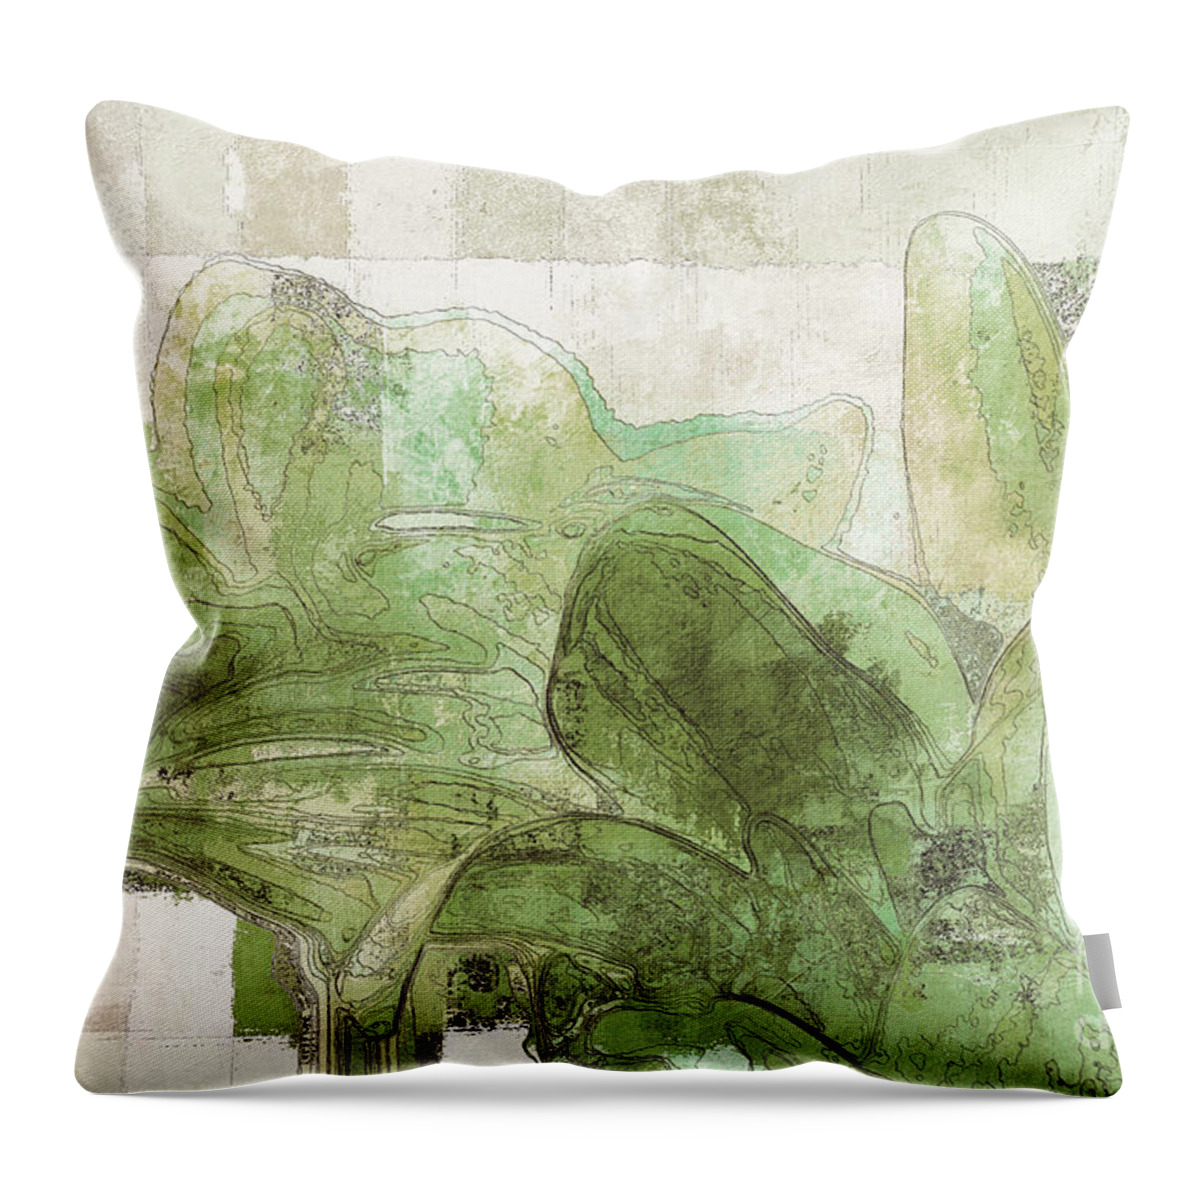 Green Throw Pillow featuring the digital art Gerberie - 30gr by Variance Collections